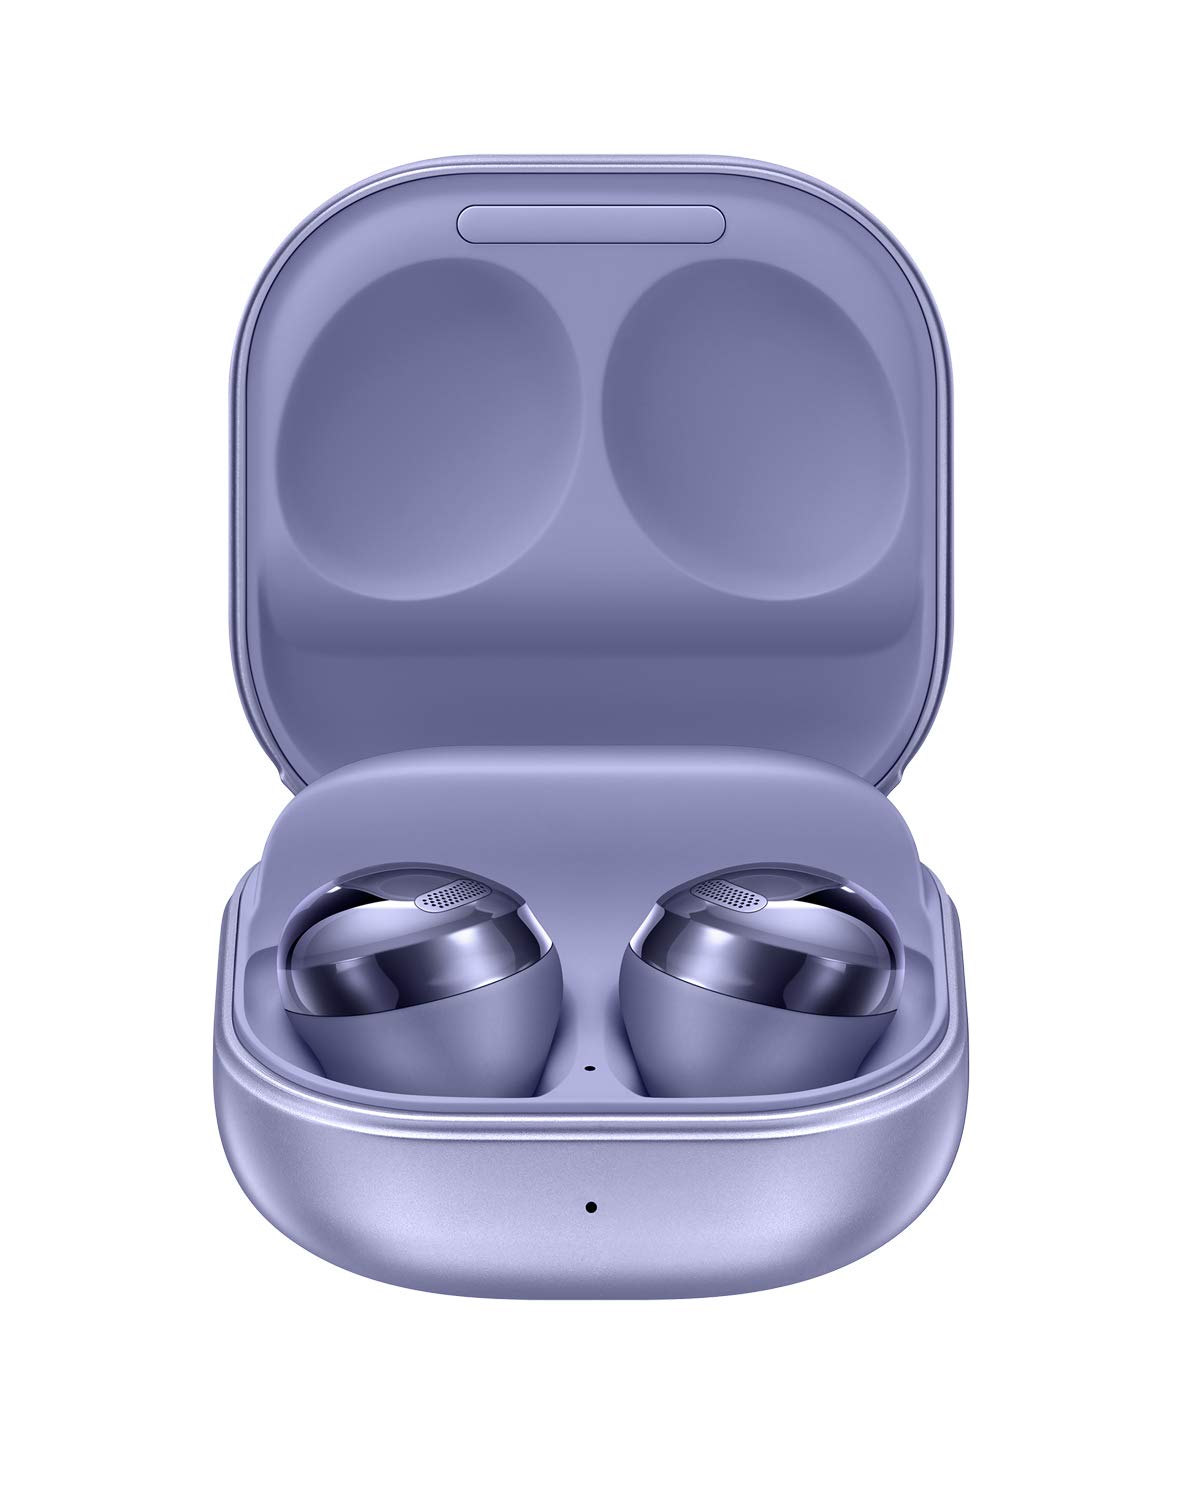 SAMSUNG Galaxy Buds Pro True Wireless Bluetooth Earbuds w/ Noise Cancelling, Charging Case, IPX7 Water Resistant, Long Battery Life, Touch Control, US Version, Phantom Violet